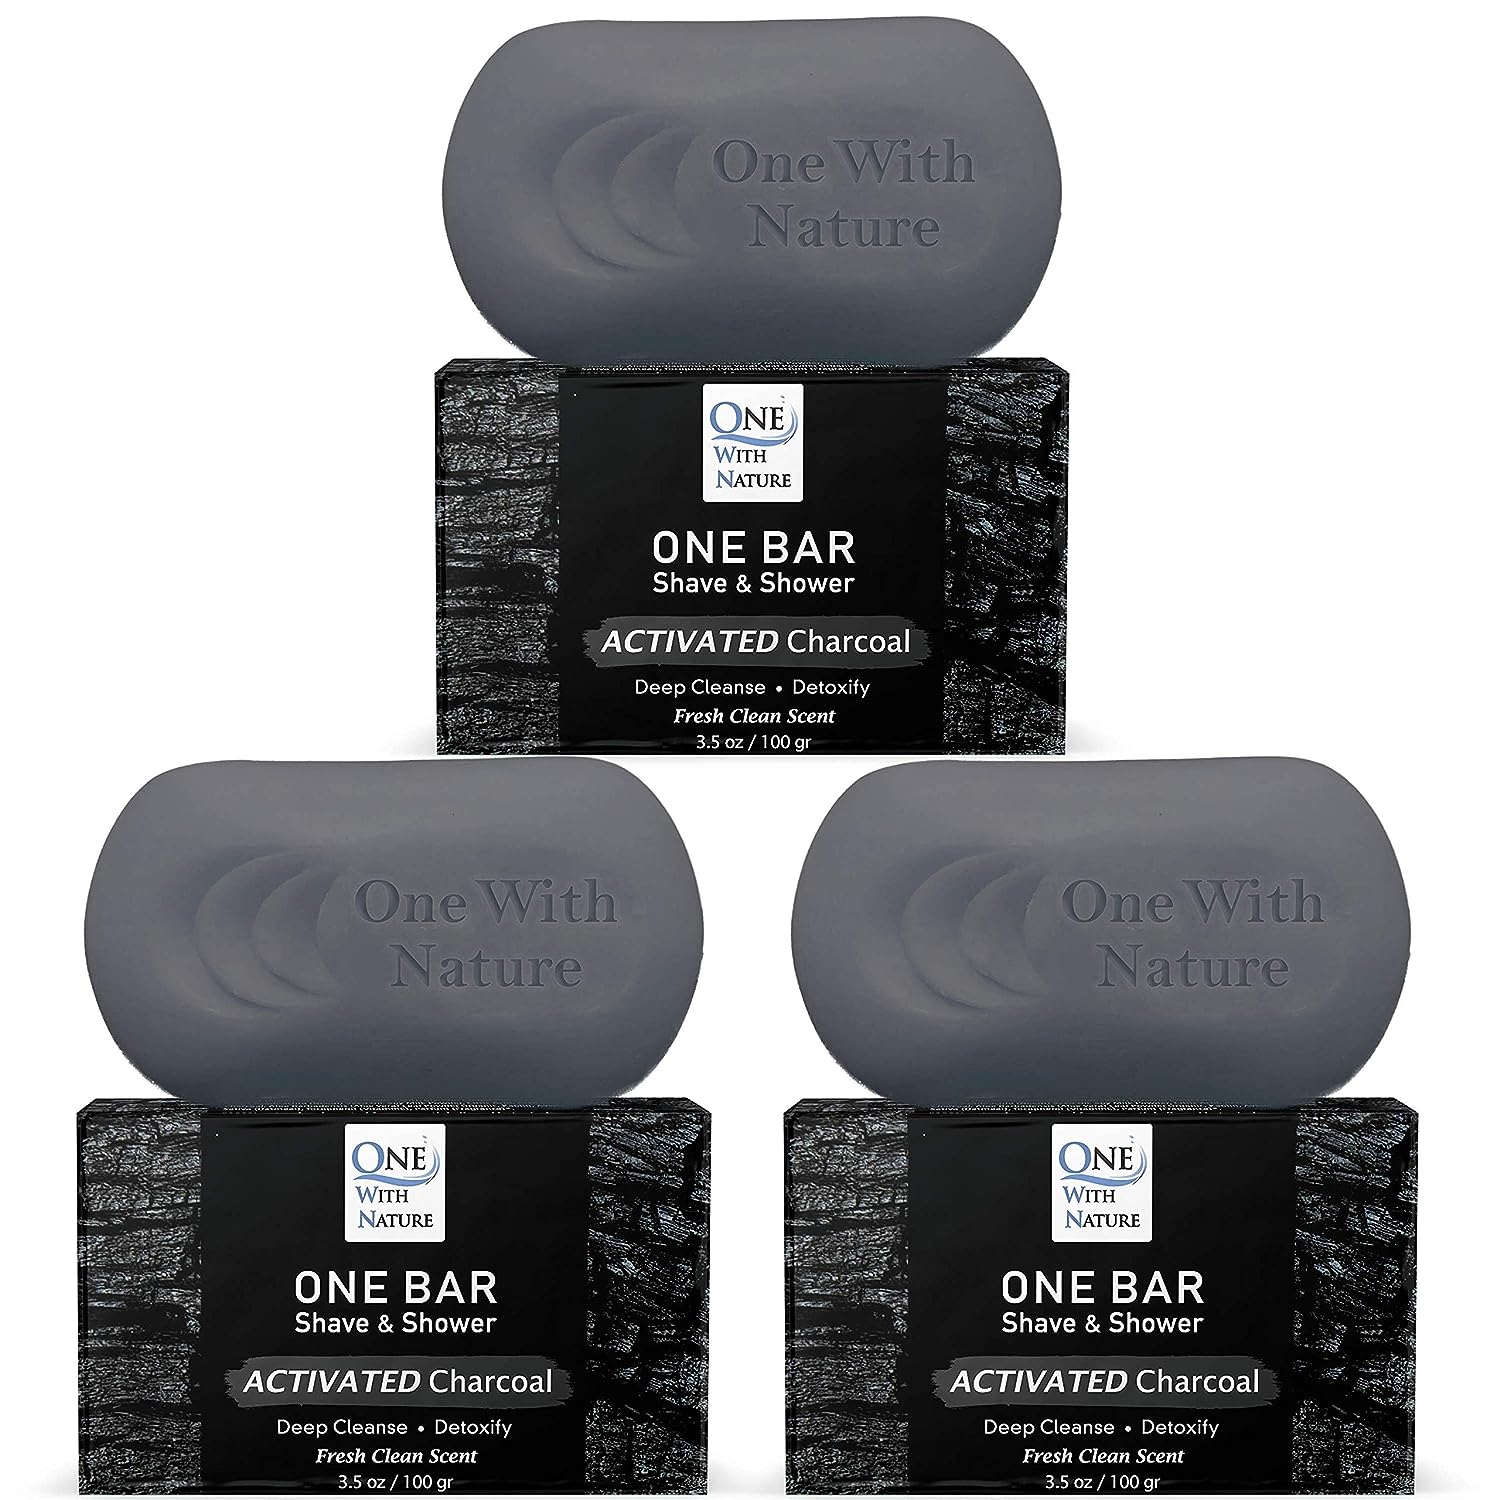 ONE Bar Activated Charcoal 3 Pack - Shave, Shower, Shampoo, face, beard, body, hair/scalp, SuperFAT “oil” Infused: Avocado, Mango, Olive, Coconut, Argan, Moisturizing and Nourishing Oil